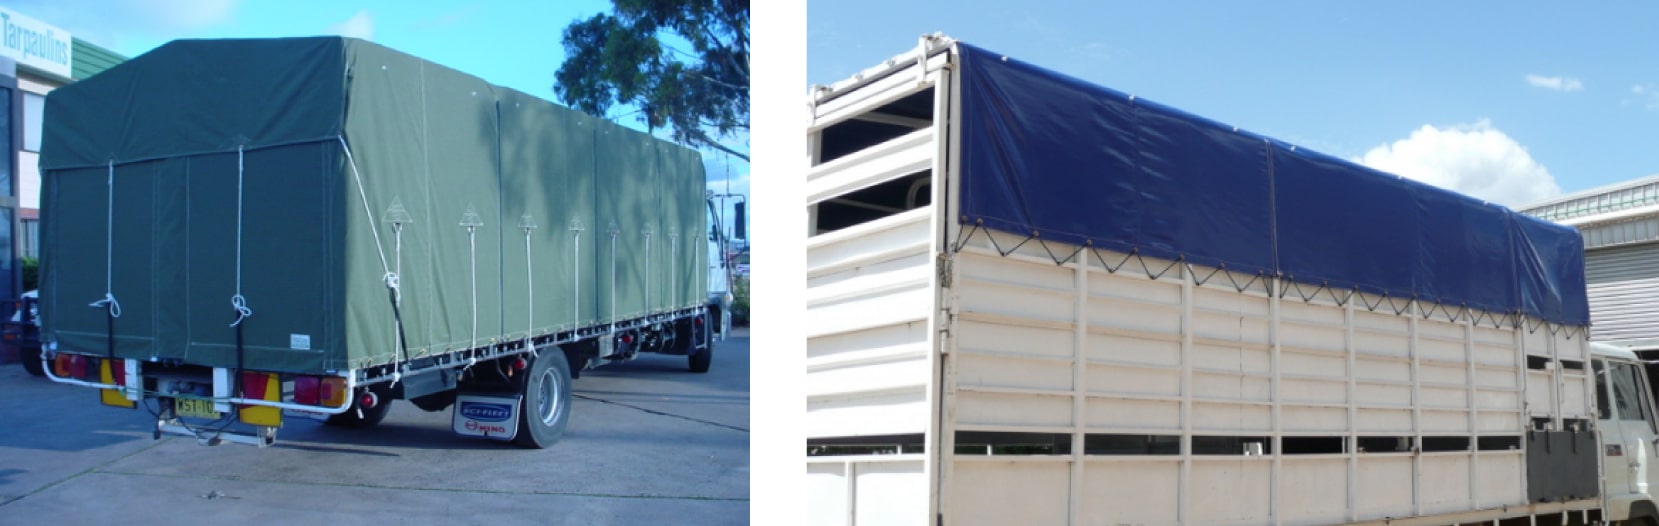 two truck tarps - one a green, rollover and the other a pvc blue tarp - toowoomba qld